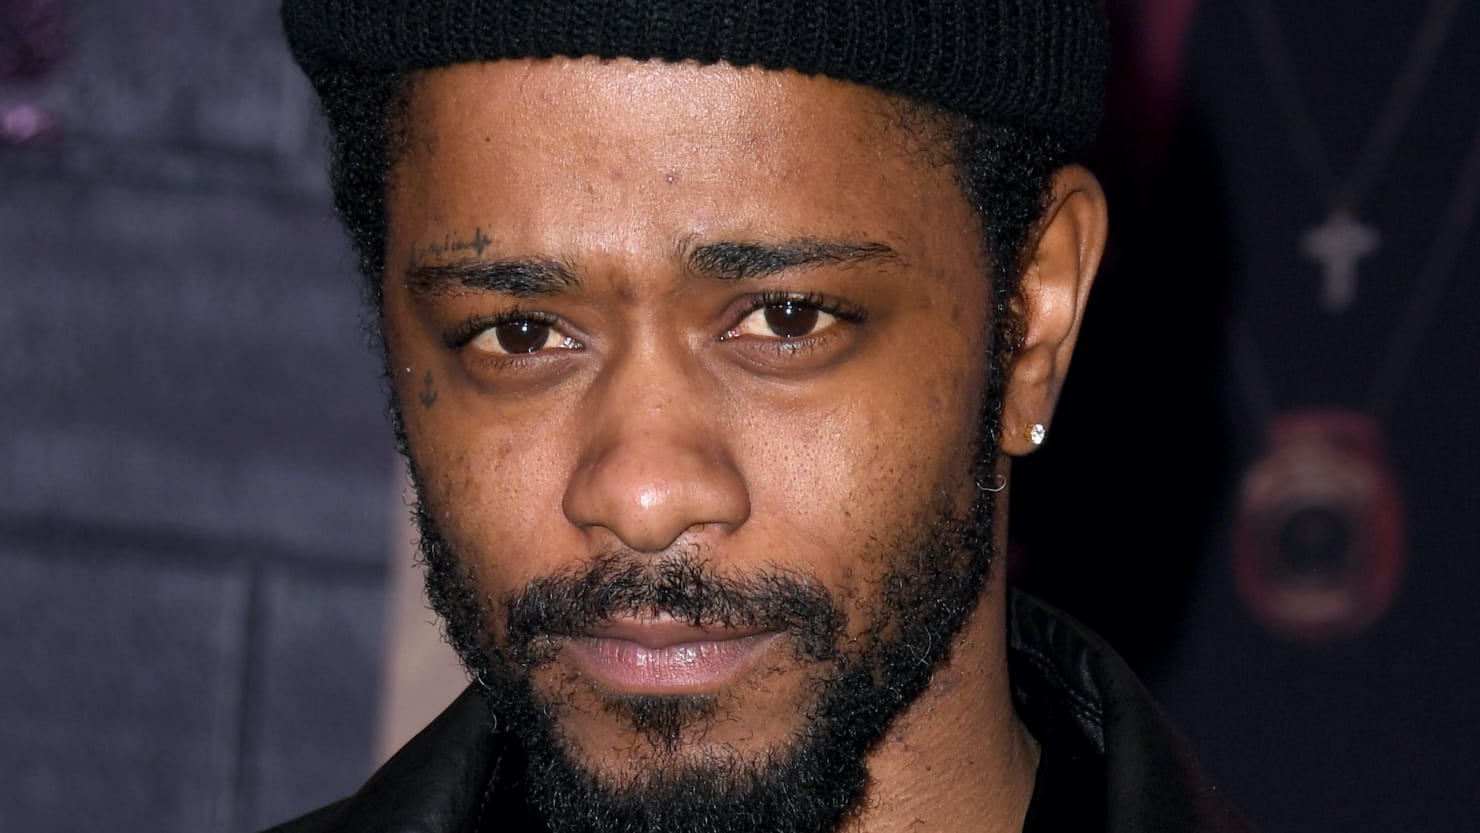 Lakeith Stanfield is also “confused” about the Oscar nomination for Best Supporting Actor